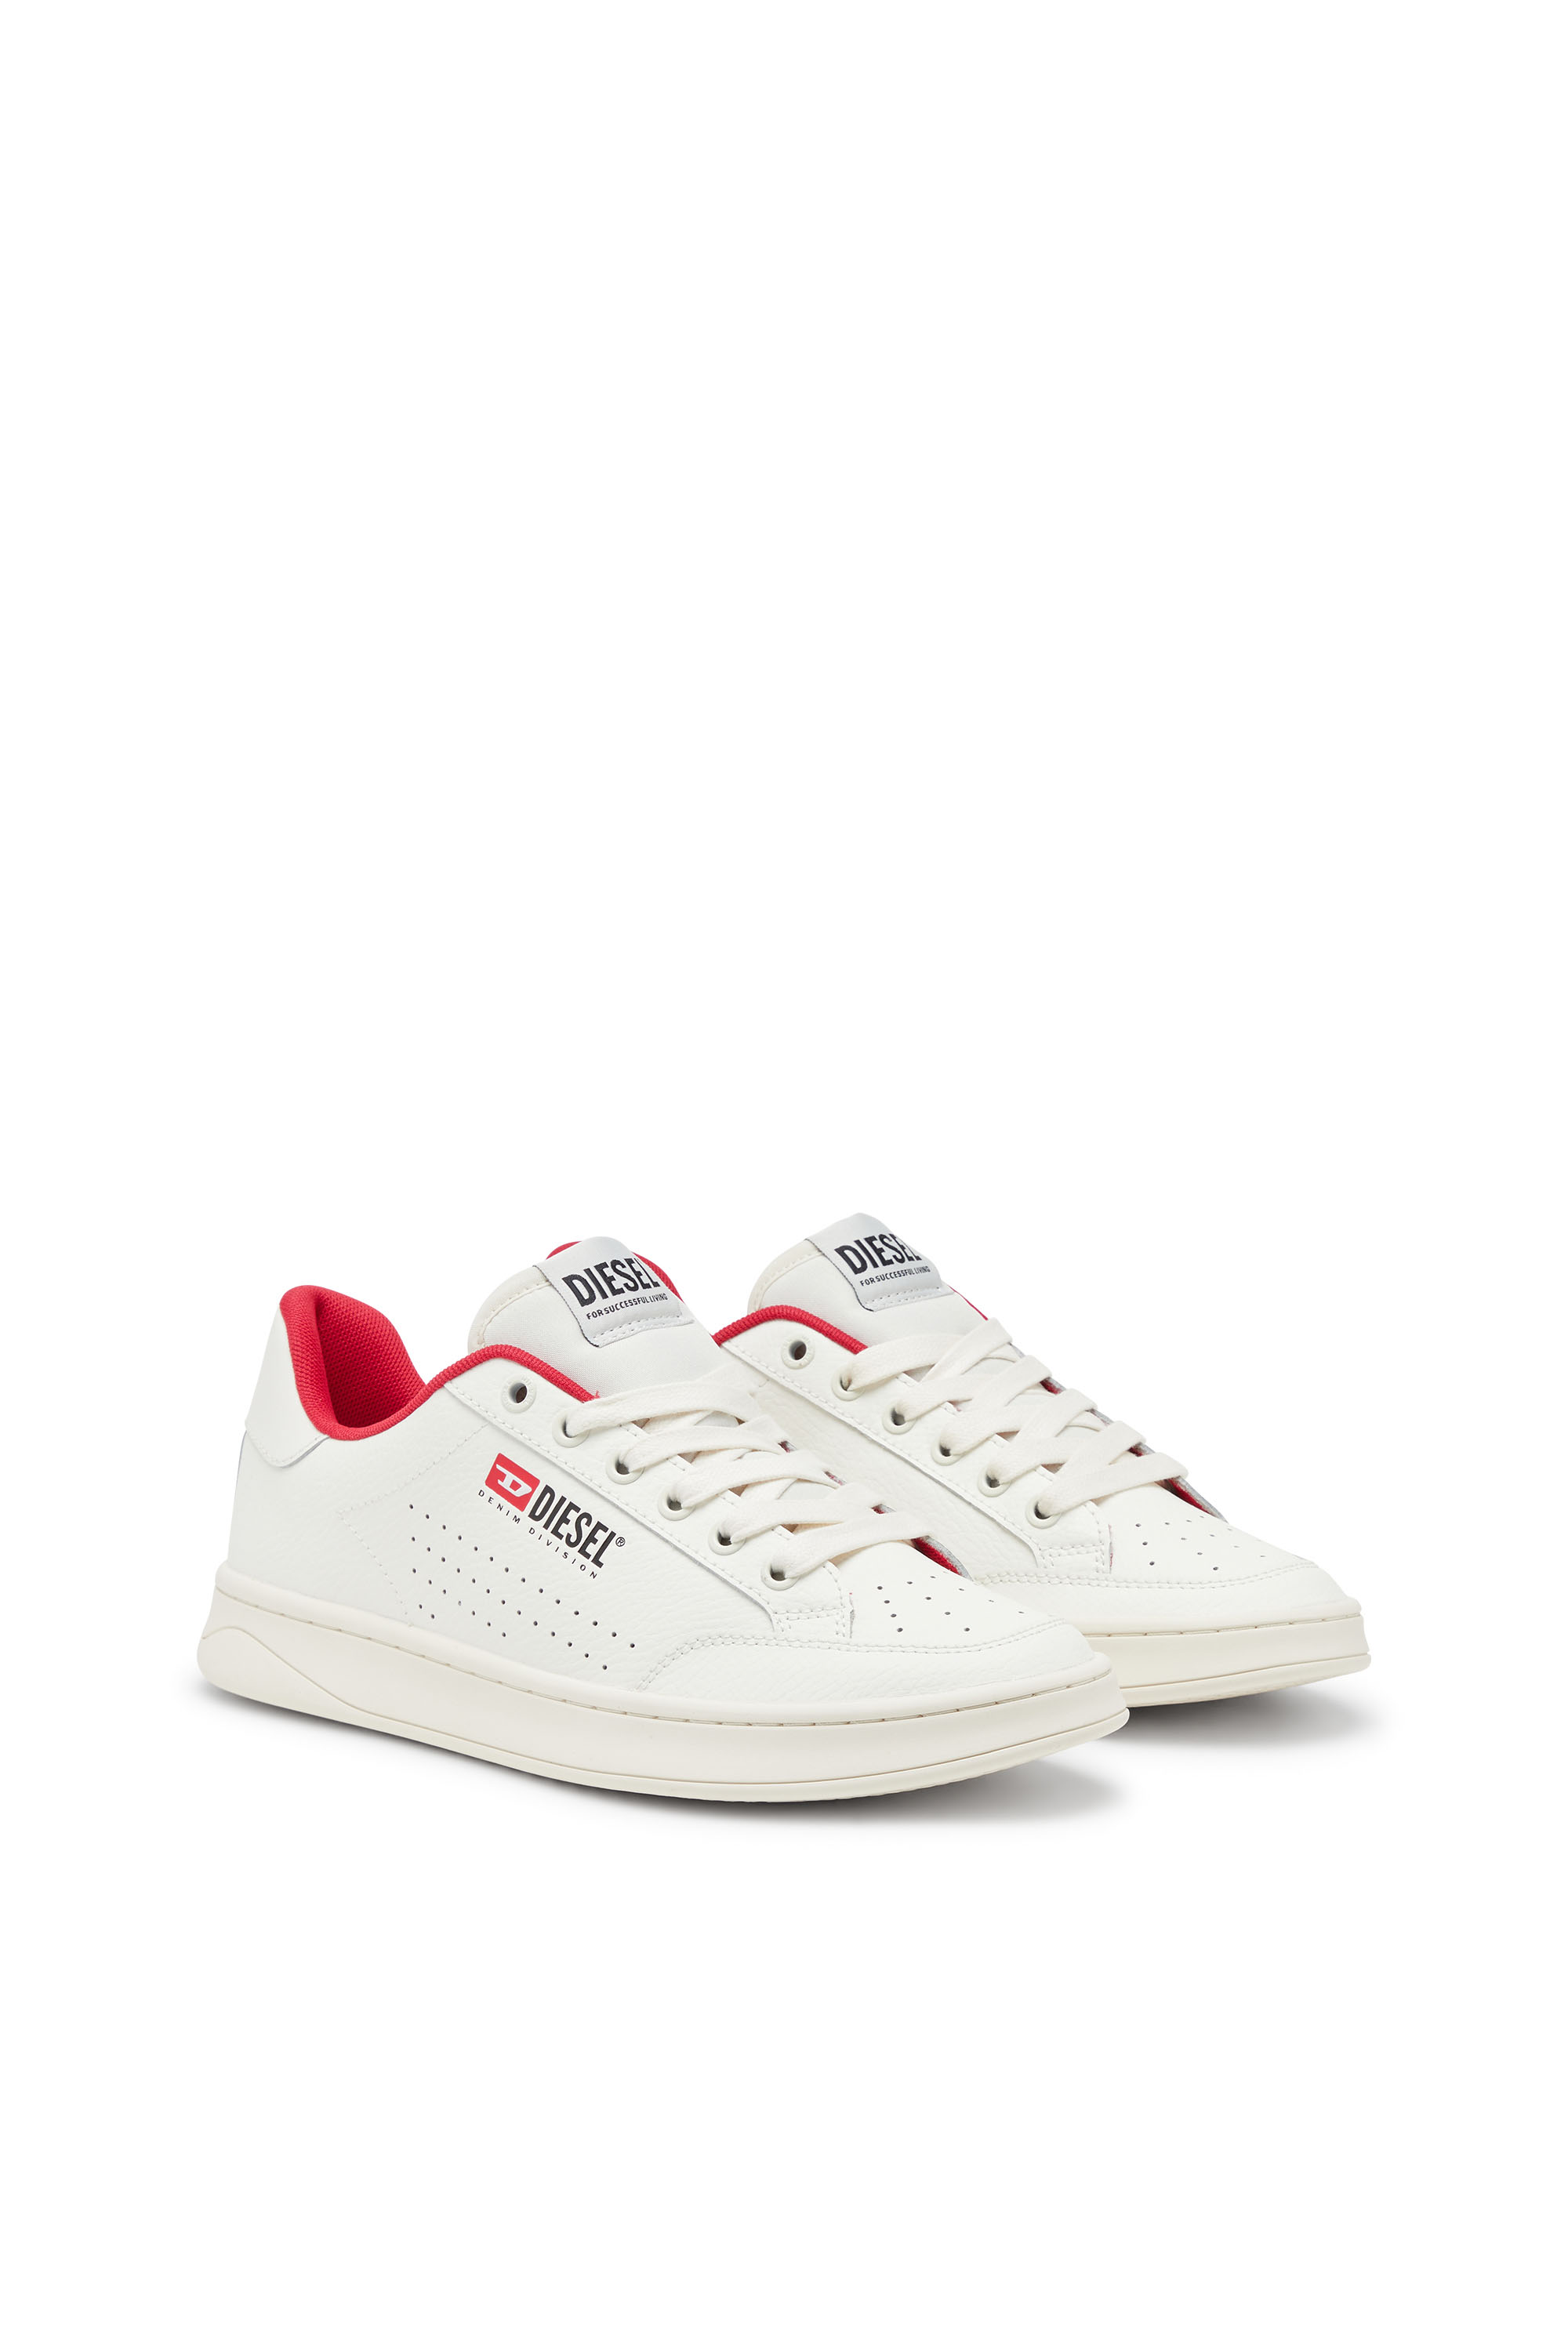 Diesel - S-ATHENE VTG, Man S-Athene-Retro sneakers in perforated leather in Multicolor - Image 2